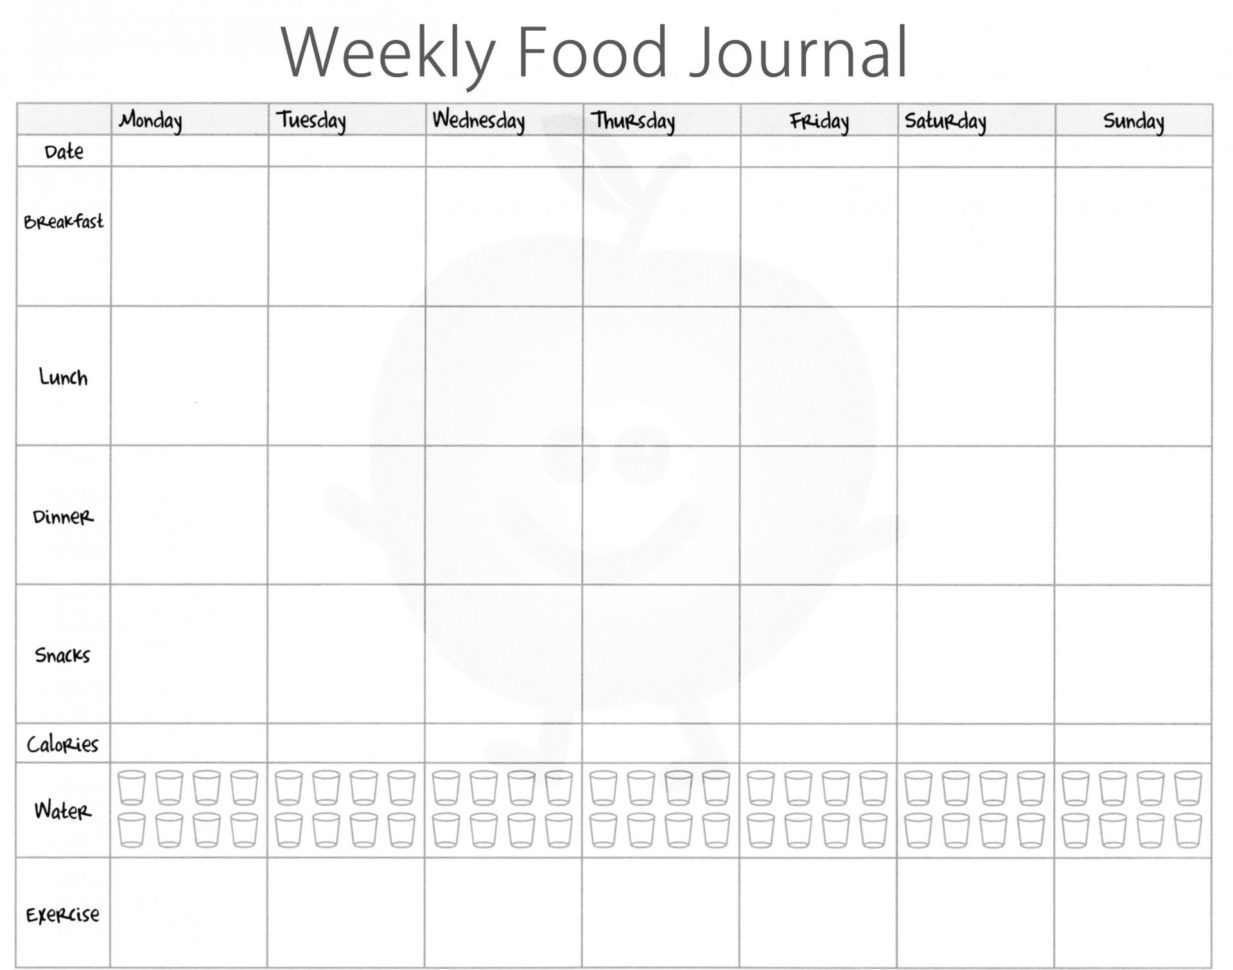 Daily Food Diary Template Pdf